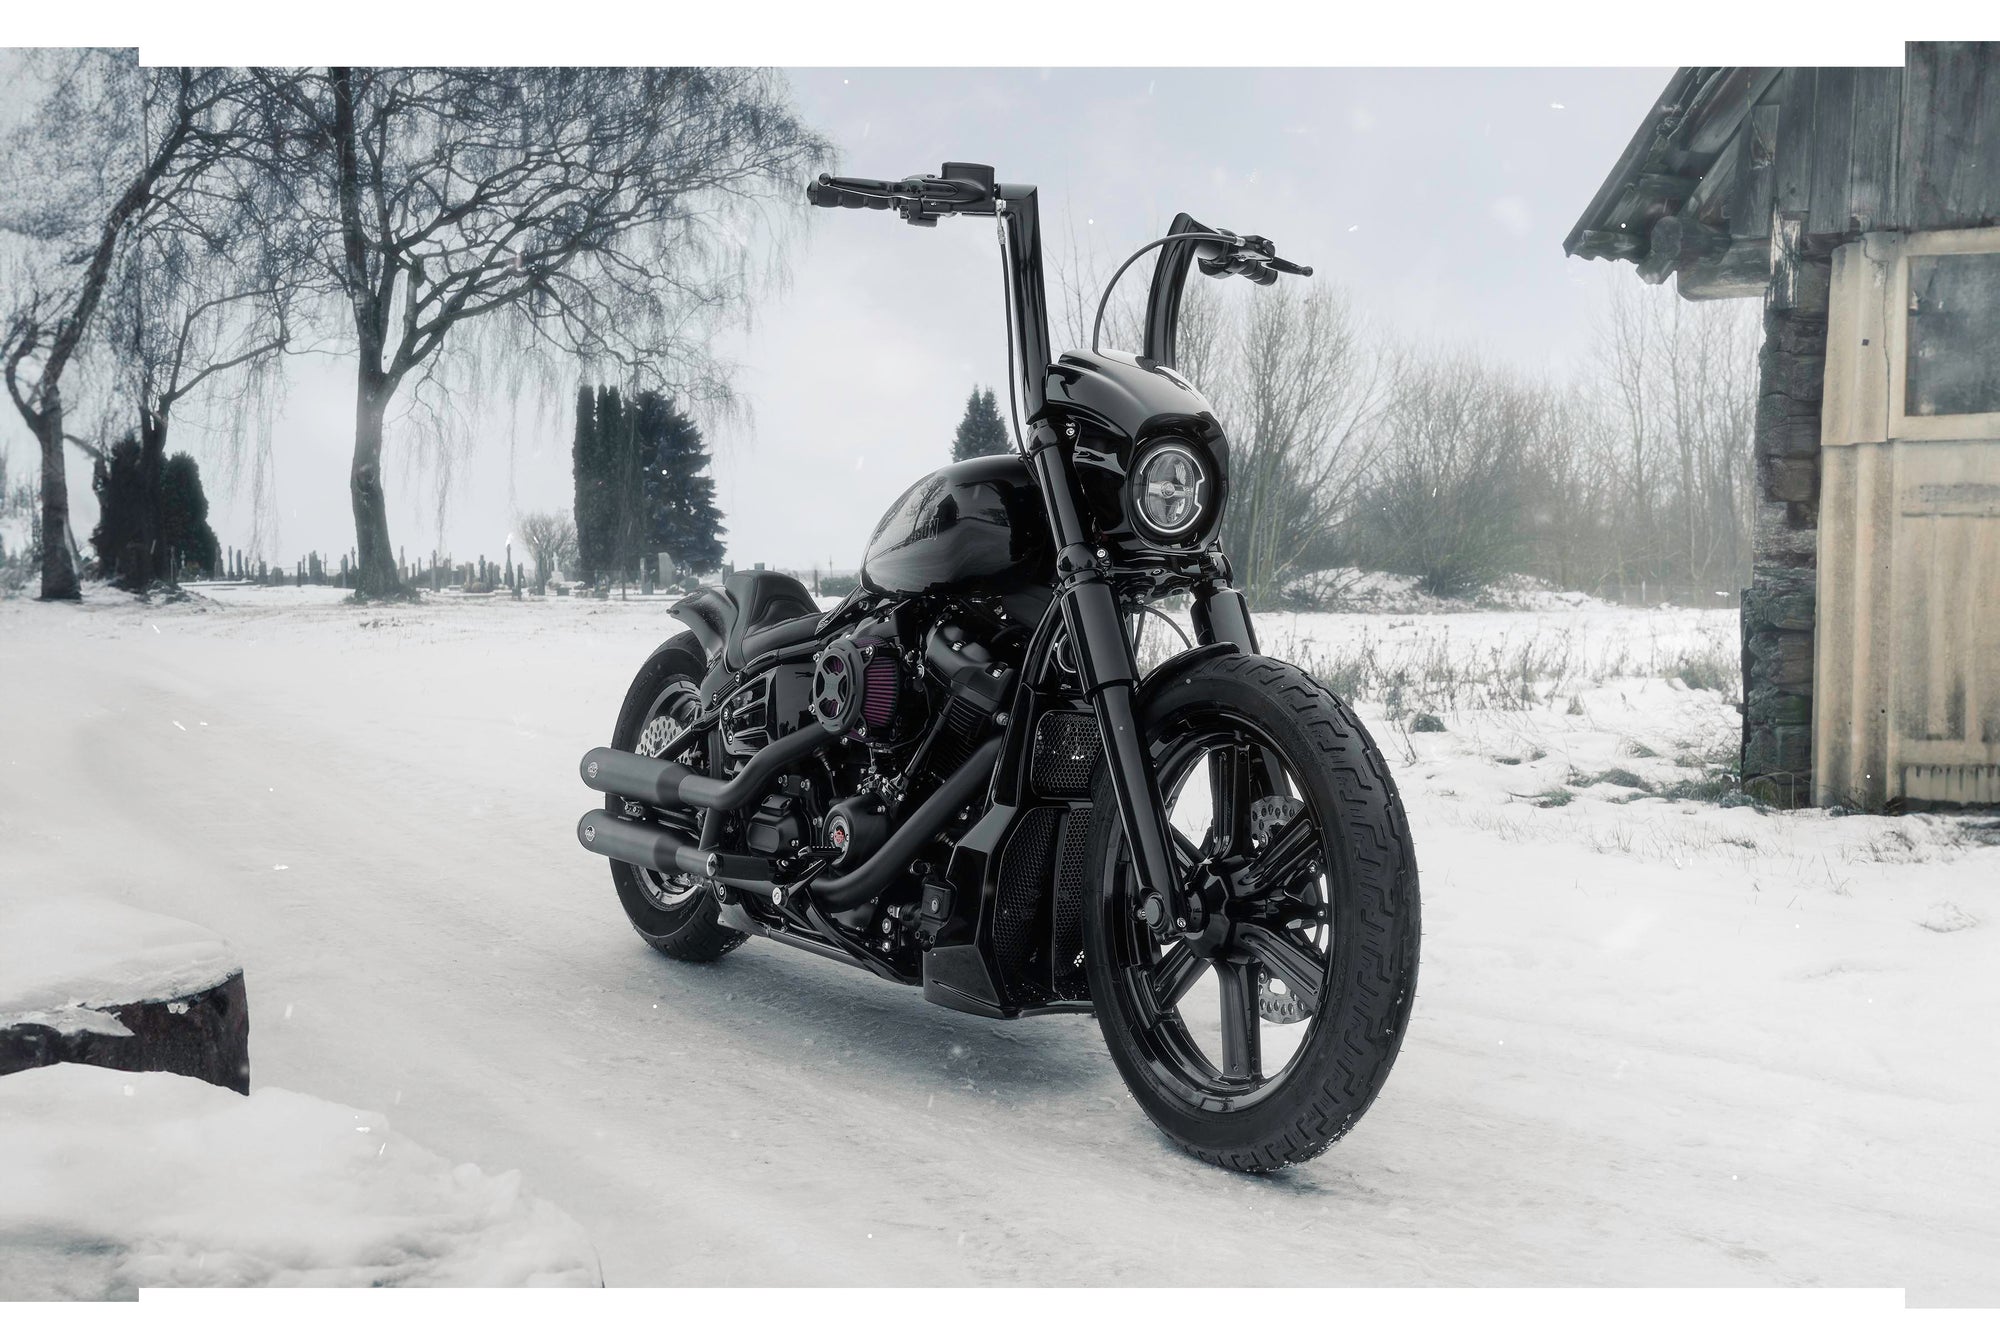 Harley Davidson motorcycle with Killer Custom parts form the front outside on a snowy day with an abandoned shack in the background